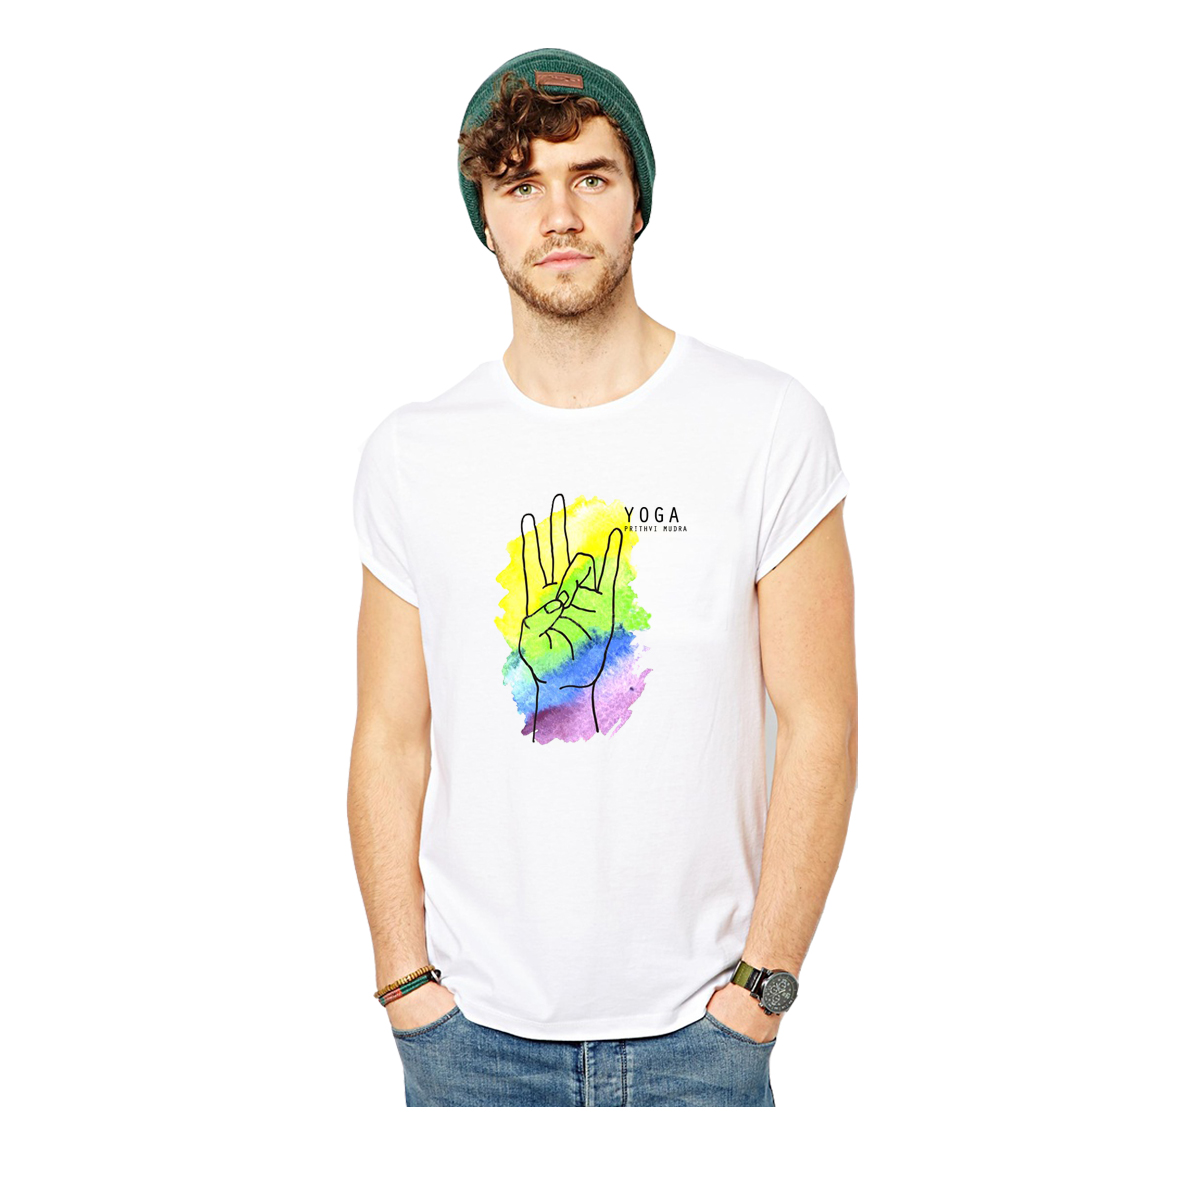 Buy PRITHVI MUDRA GRAPHIC PRINTED T-SHIRT Online @ ₹399 from ShopClues